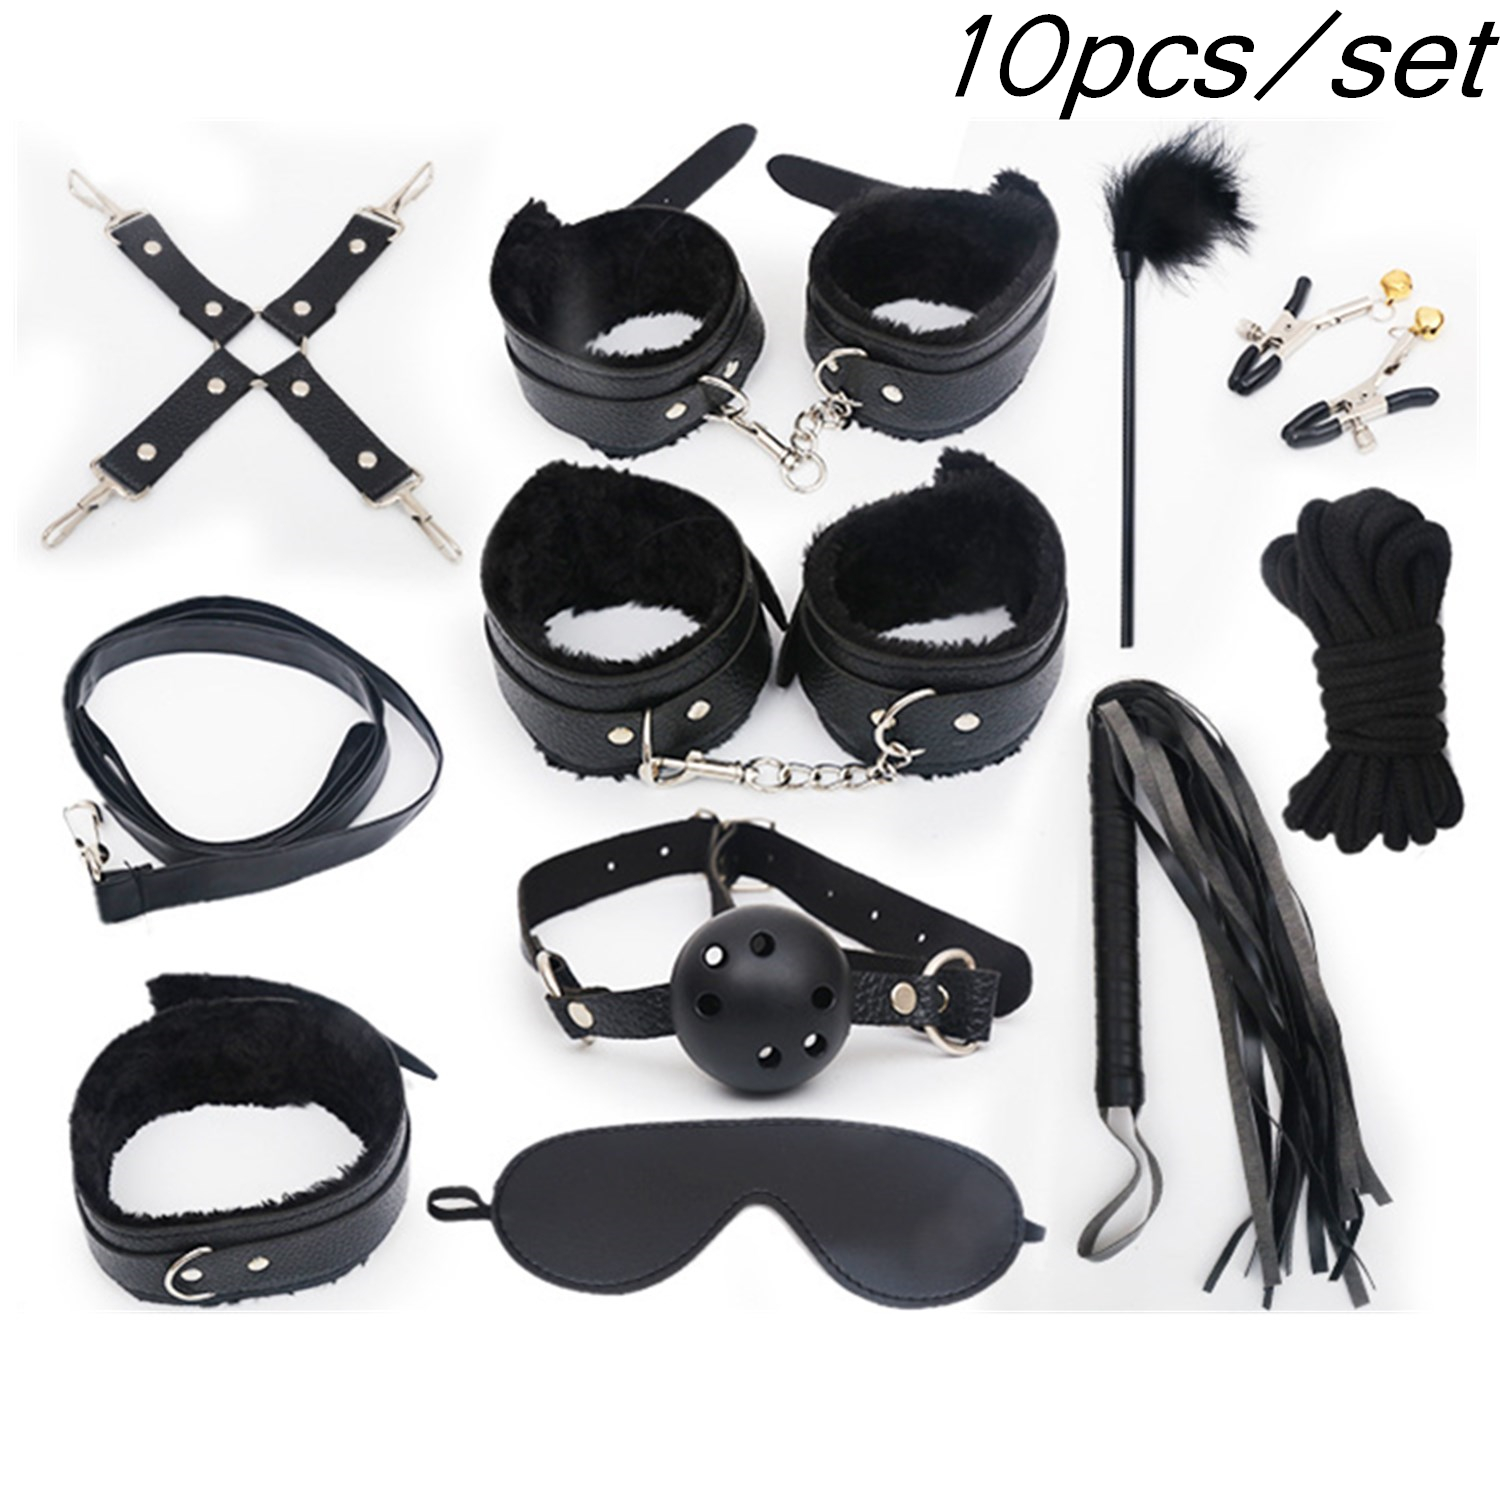 Upscale BDSM Bondage Erotica Gear for Couples Prime, Restraint  Bondageromance Kit with Real Fuzzy Handcuffs, Horse Whip, Blindfold,  Flogger, Bed Restraints for Sex Play, Gift Boxed, White